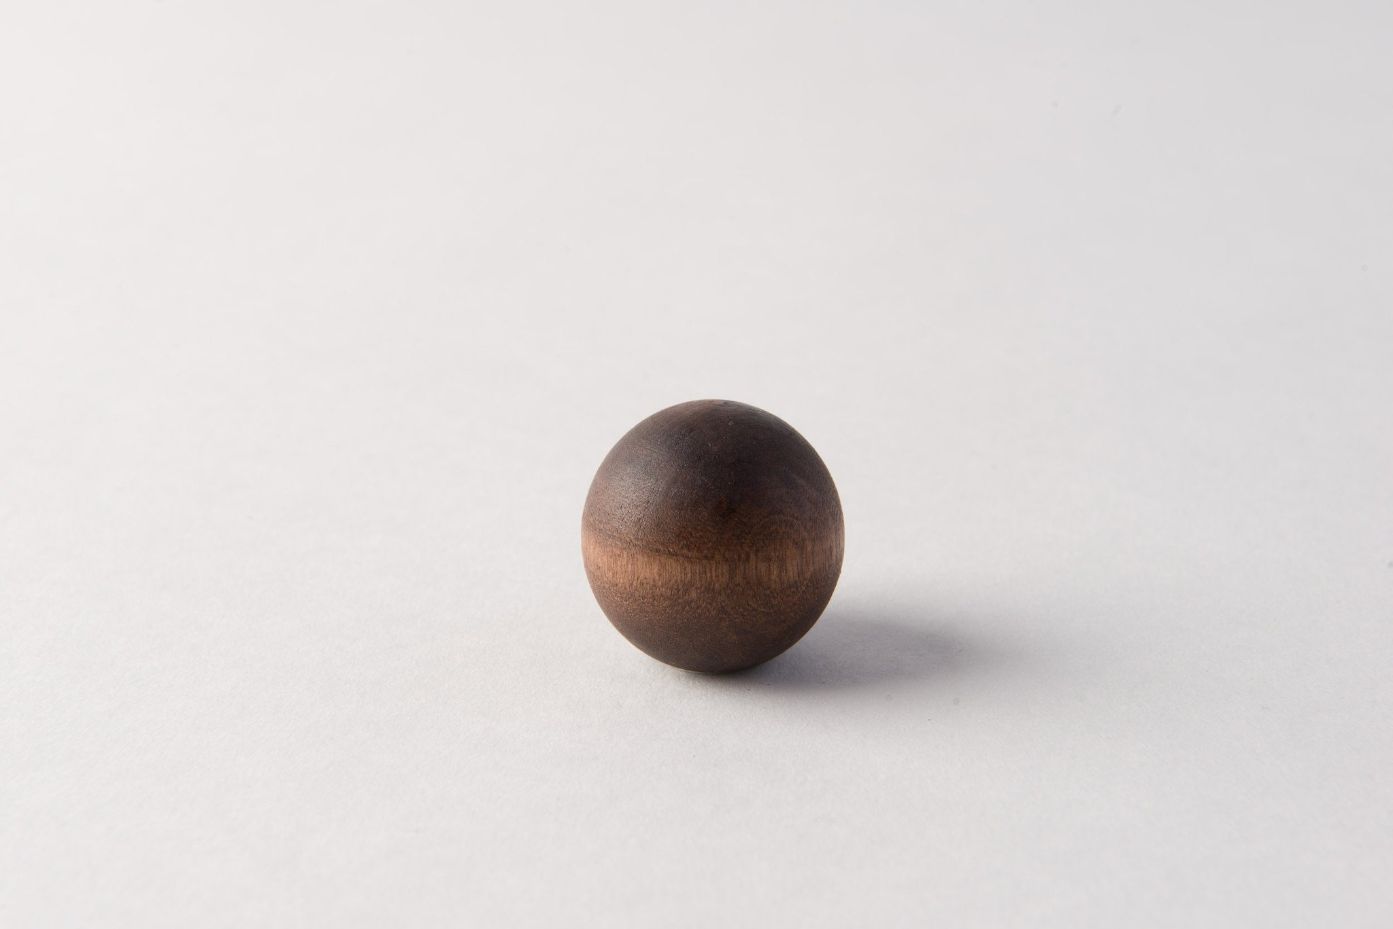 https://www.hotel-lamps.com/resources/assets/images/product_images/Wood Ball (Walnut) 1.75.jpg